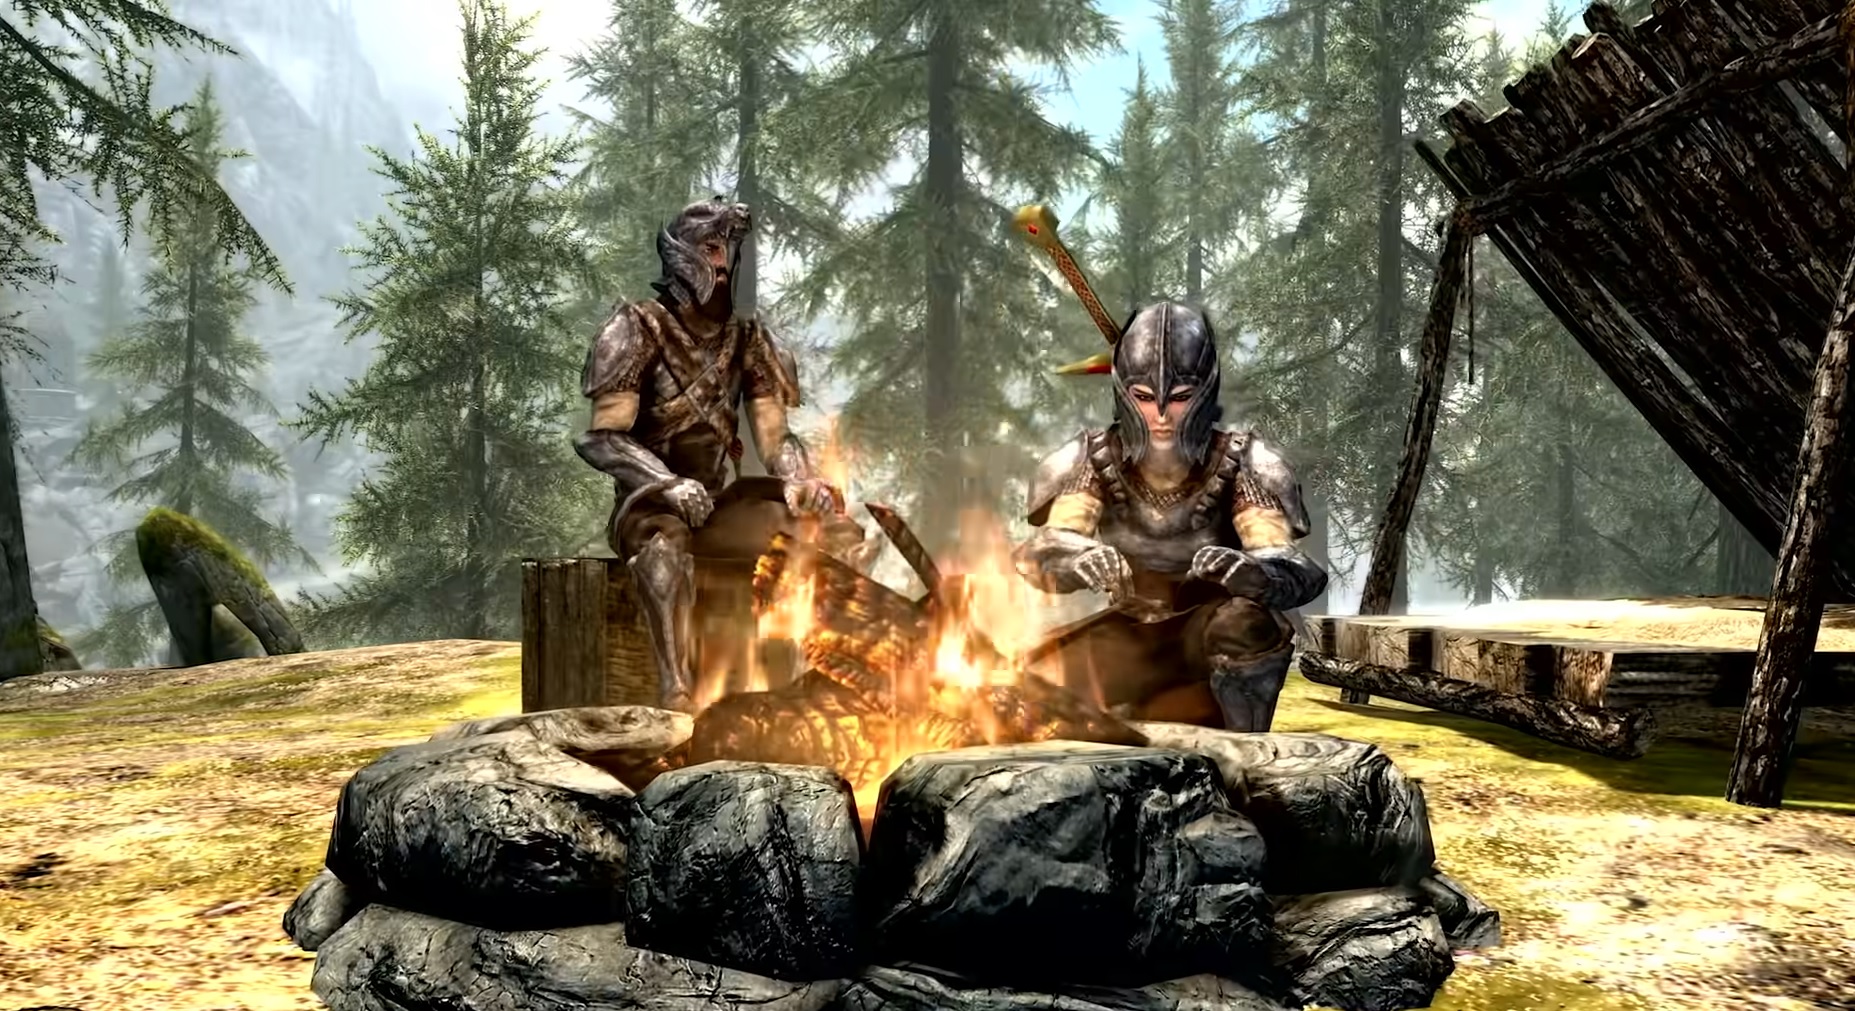  This mod lets you treat Skyrim Anniversary Edition like a pick-and-choose buffet 